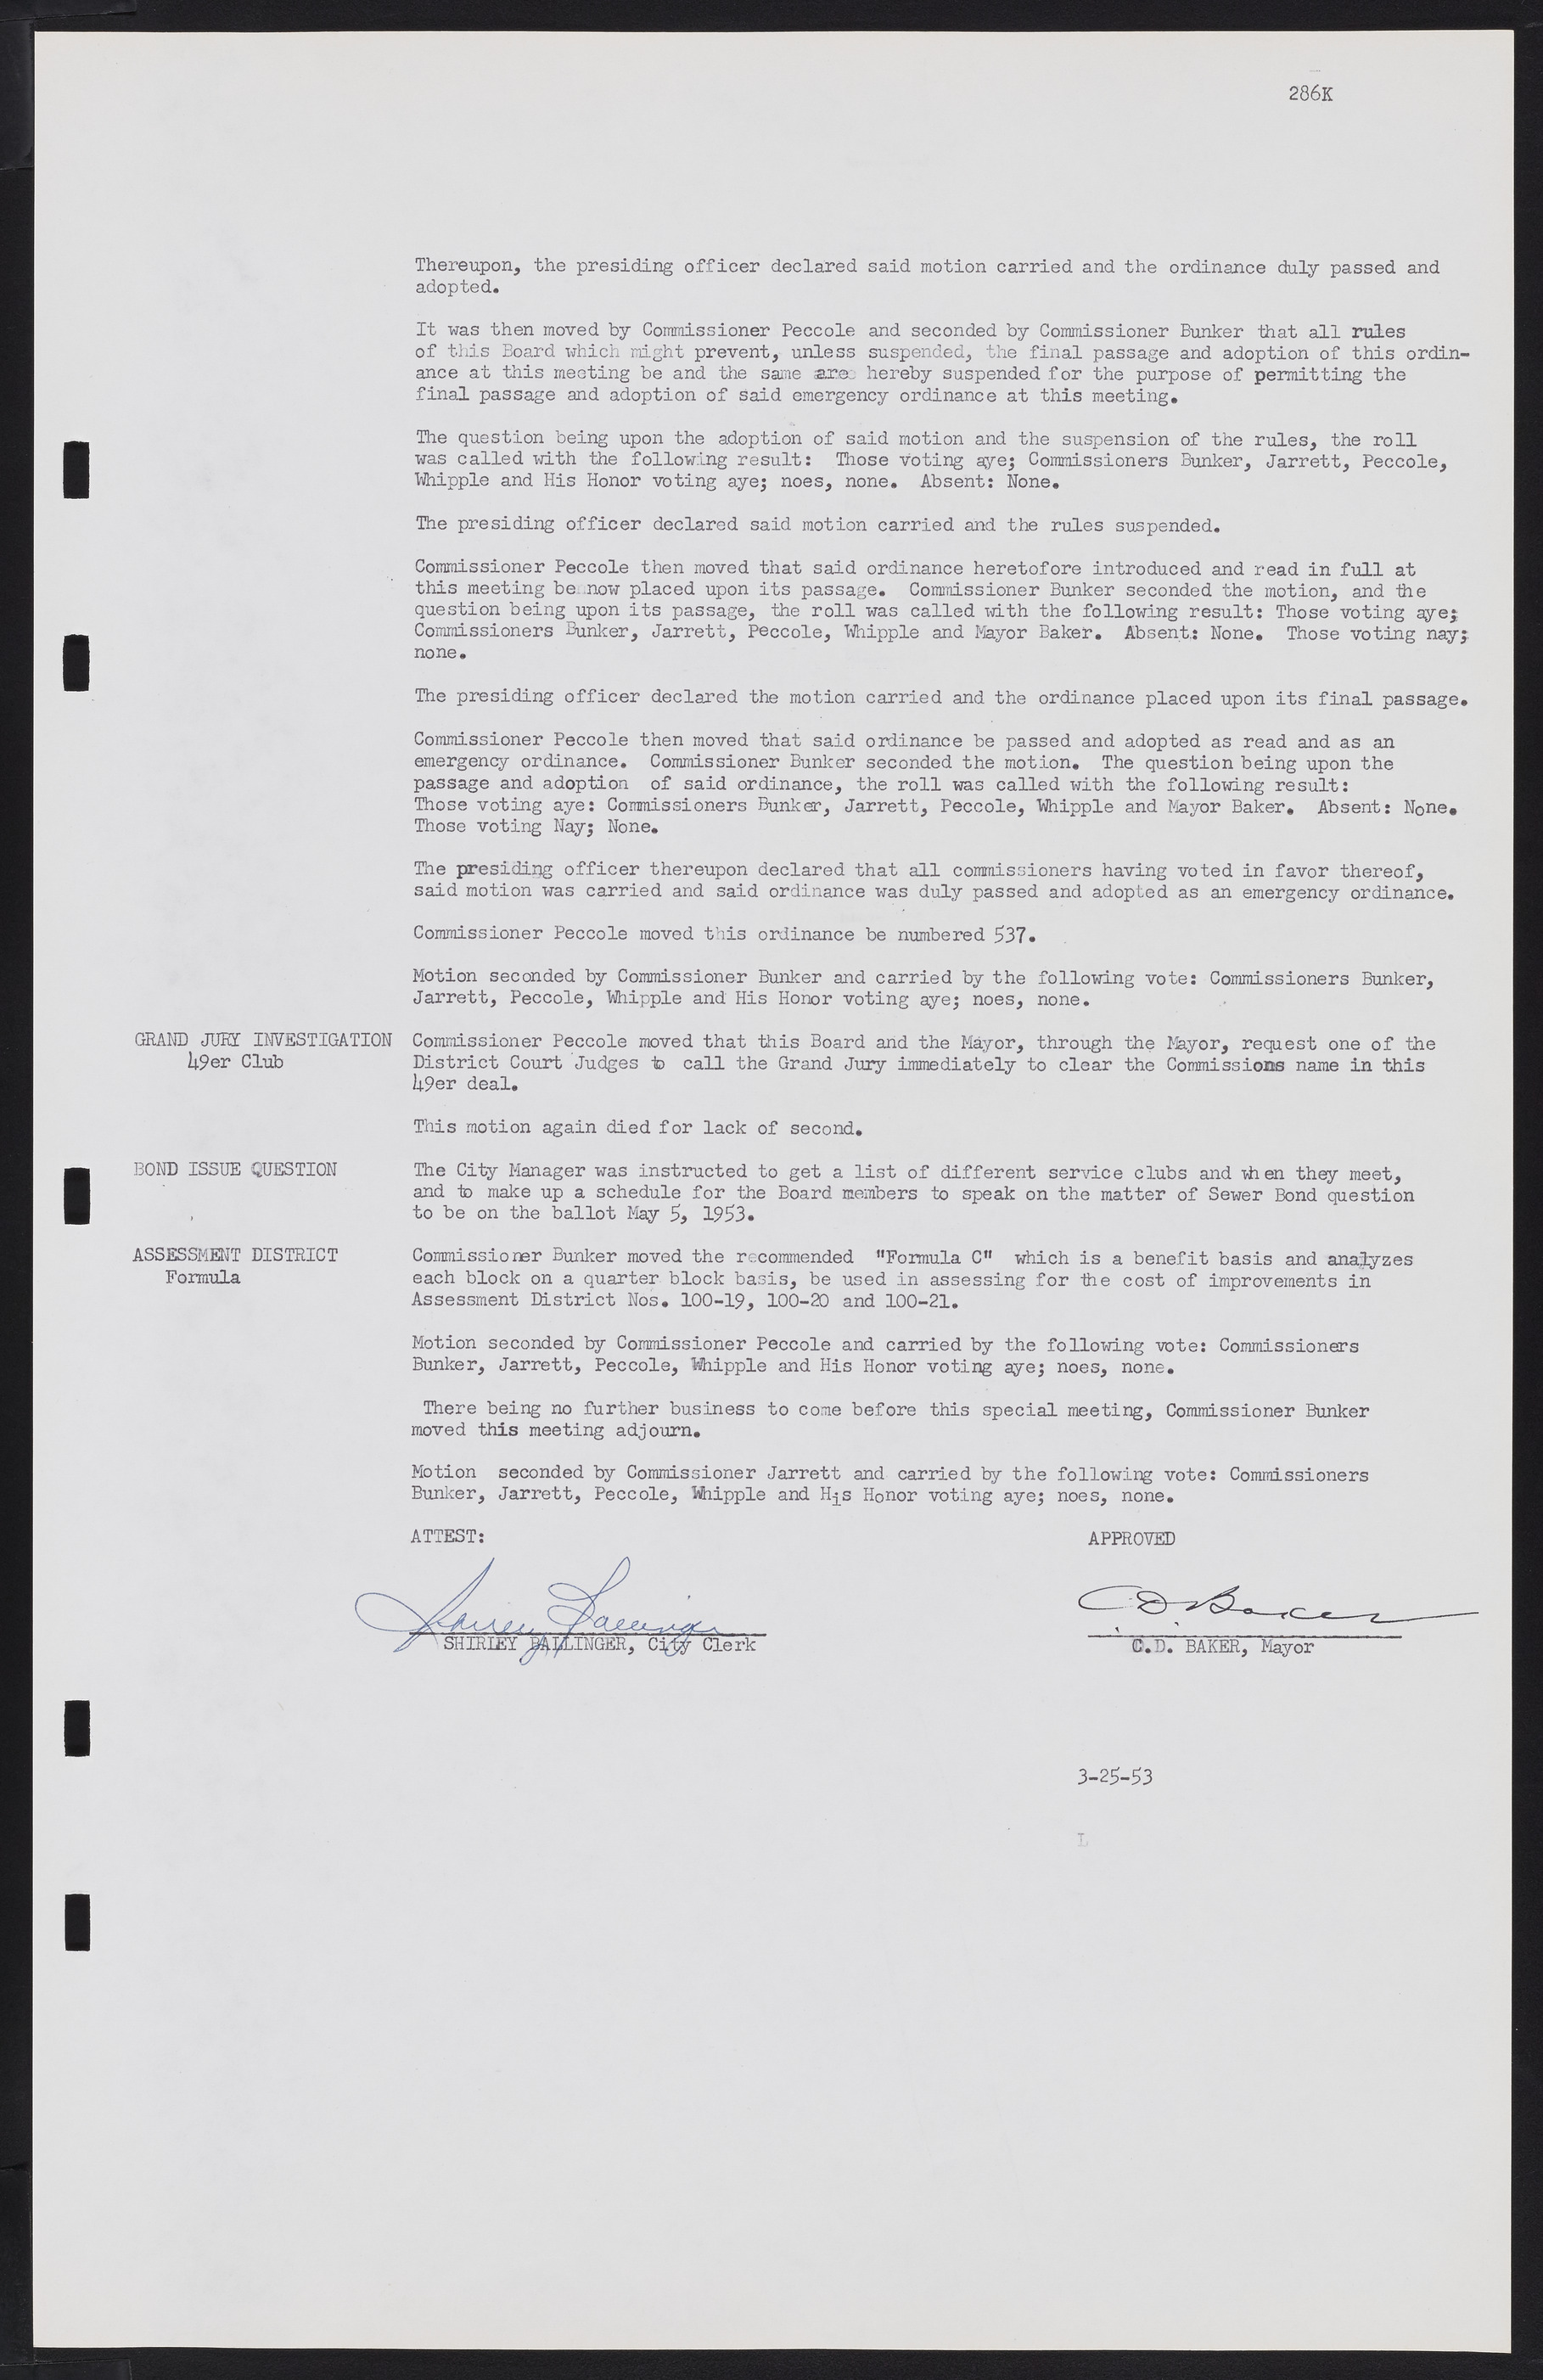 Las Vegas City Commission Minutes, May 26, 1952 to February 17, 1954, lvc000008-313